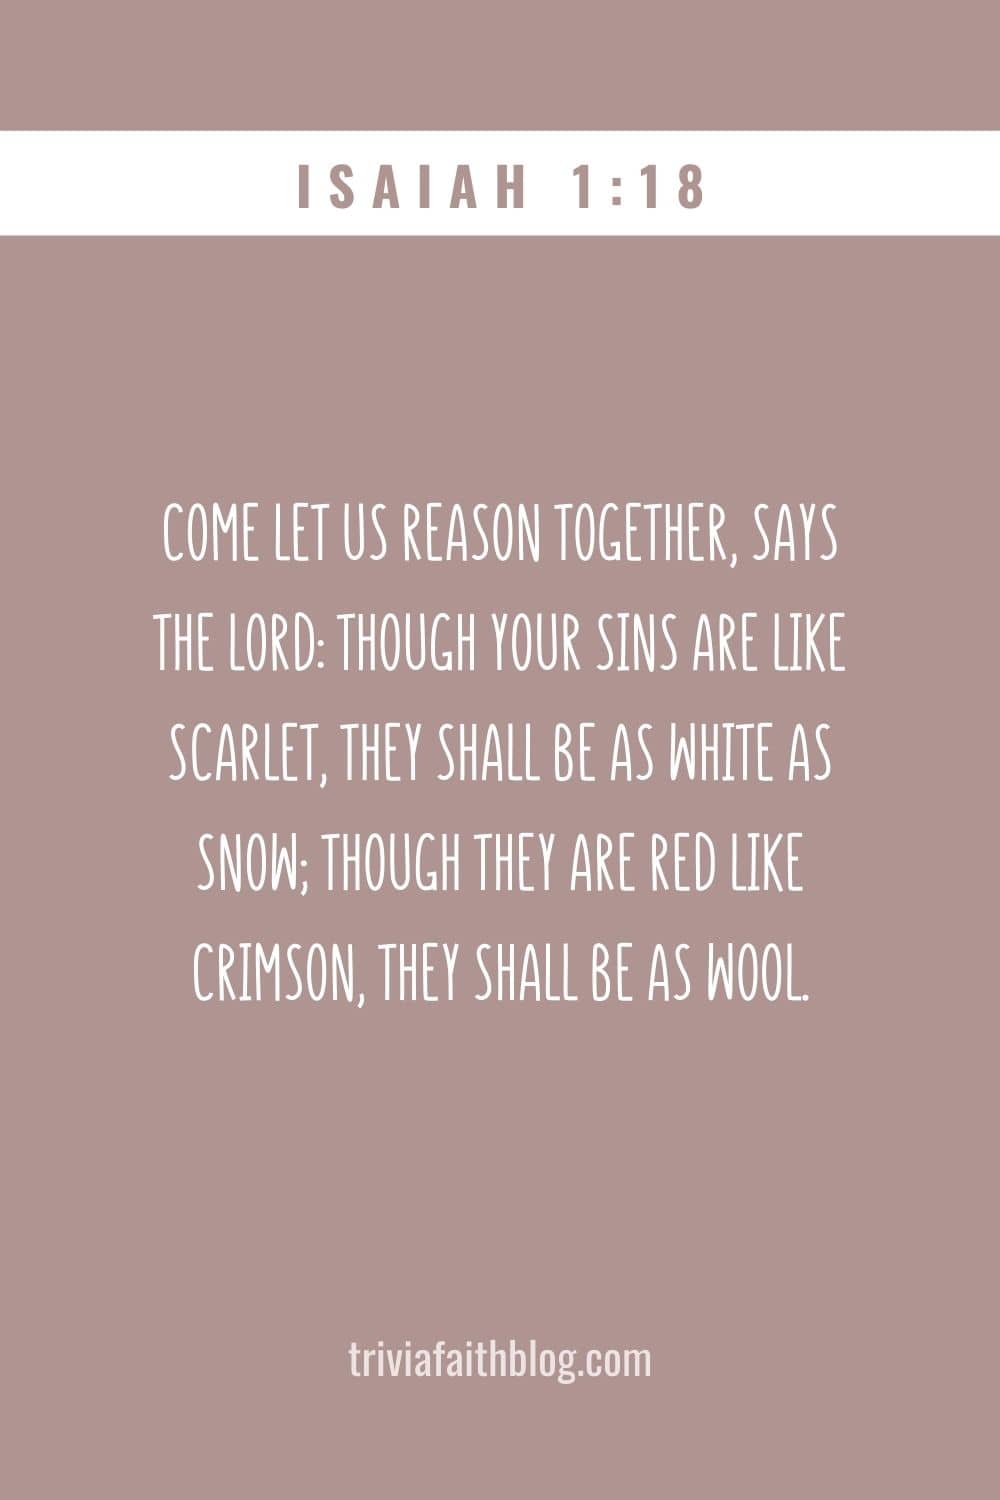 Come let us reason together, says the LORD